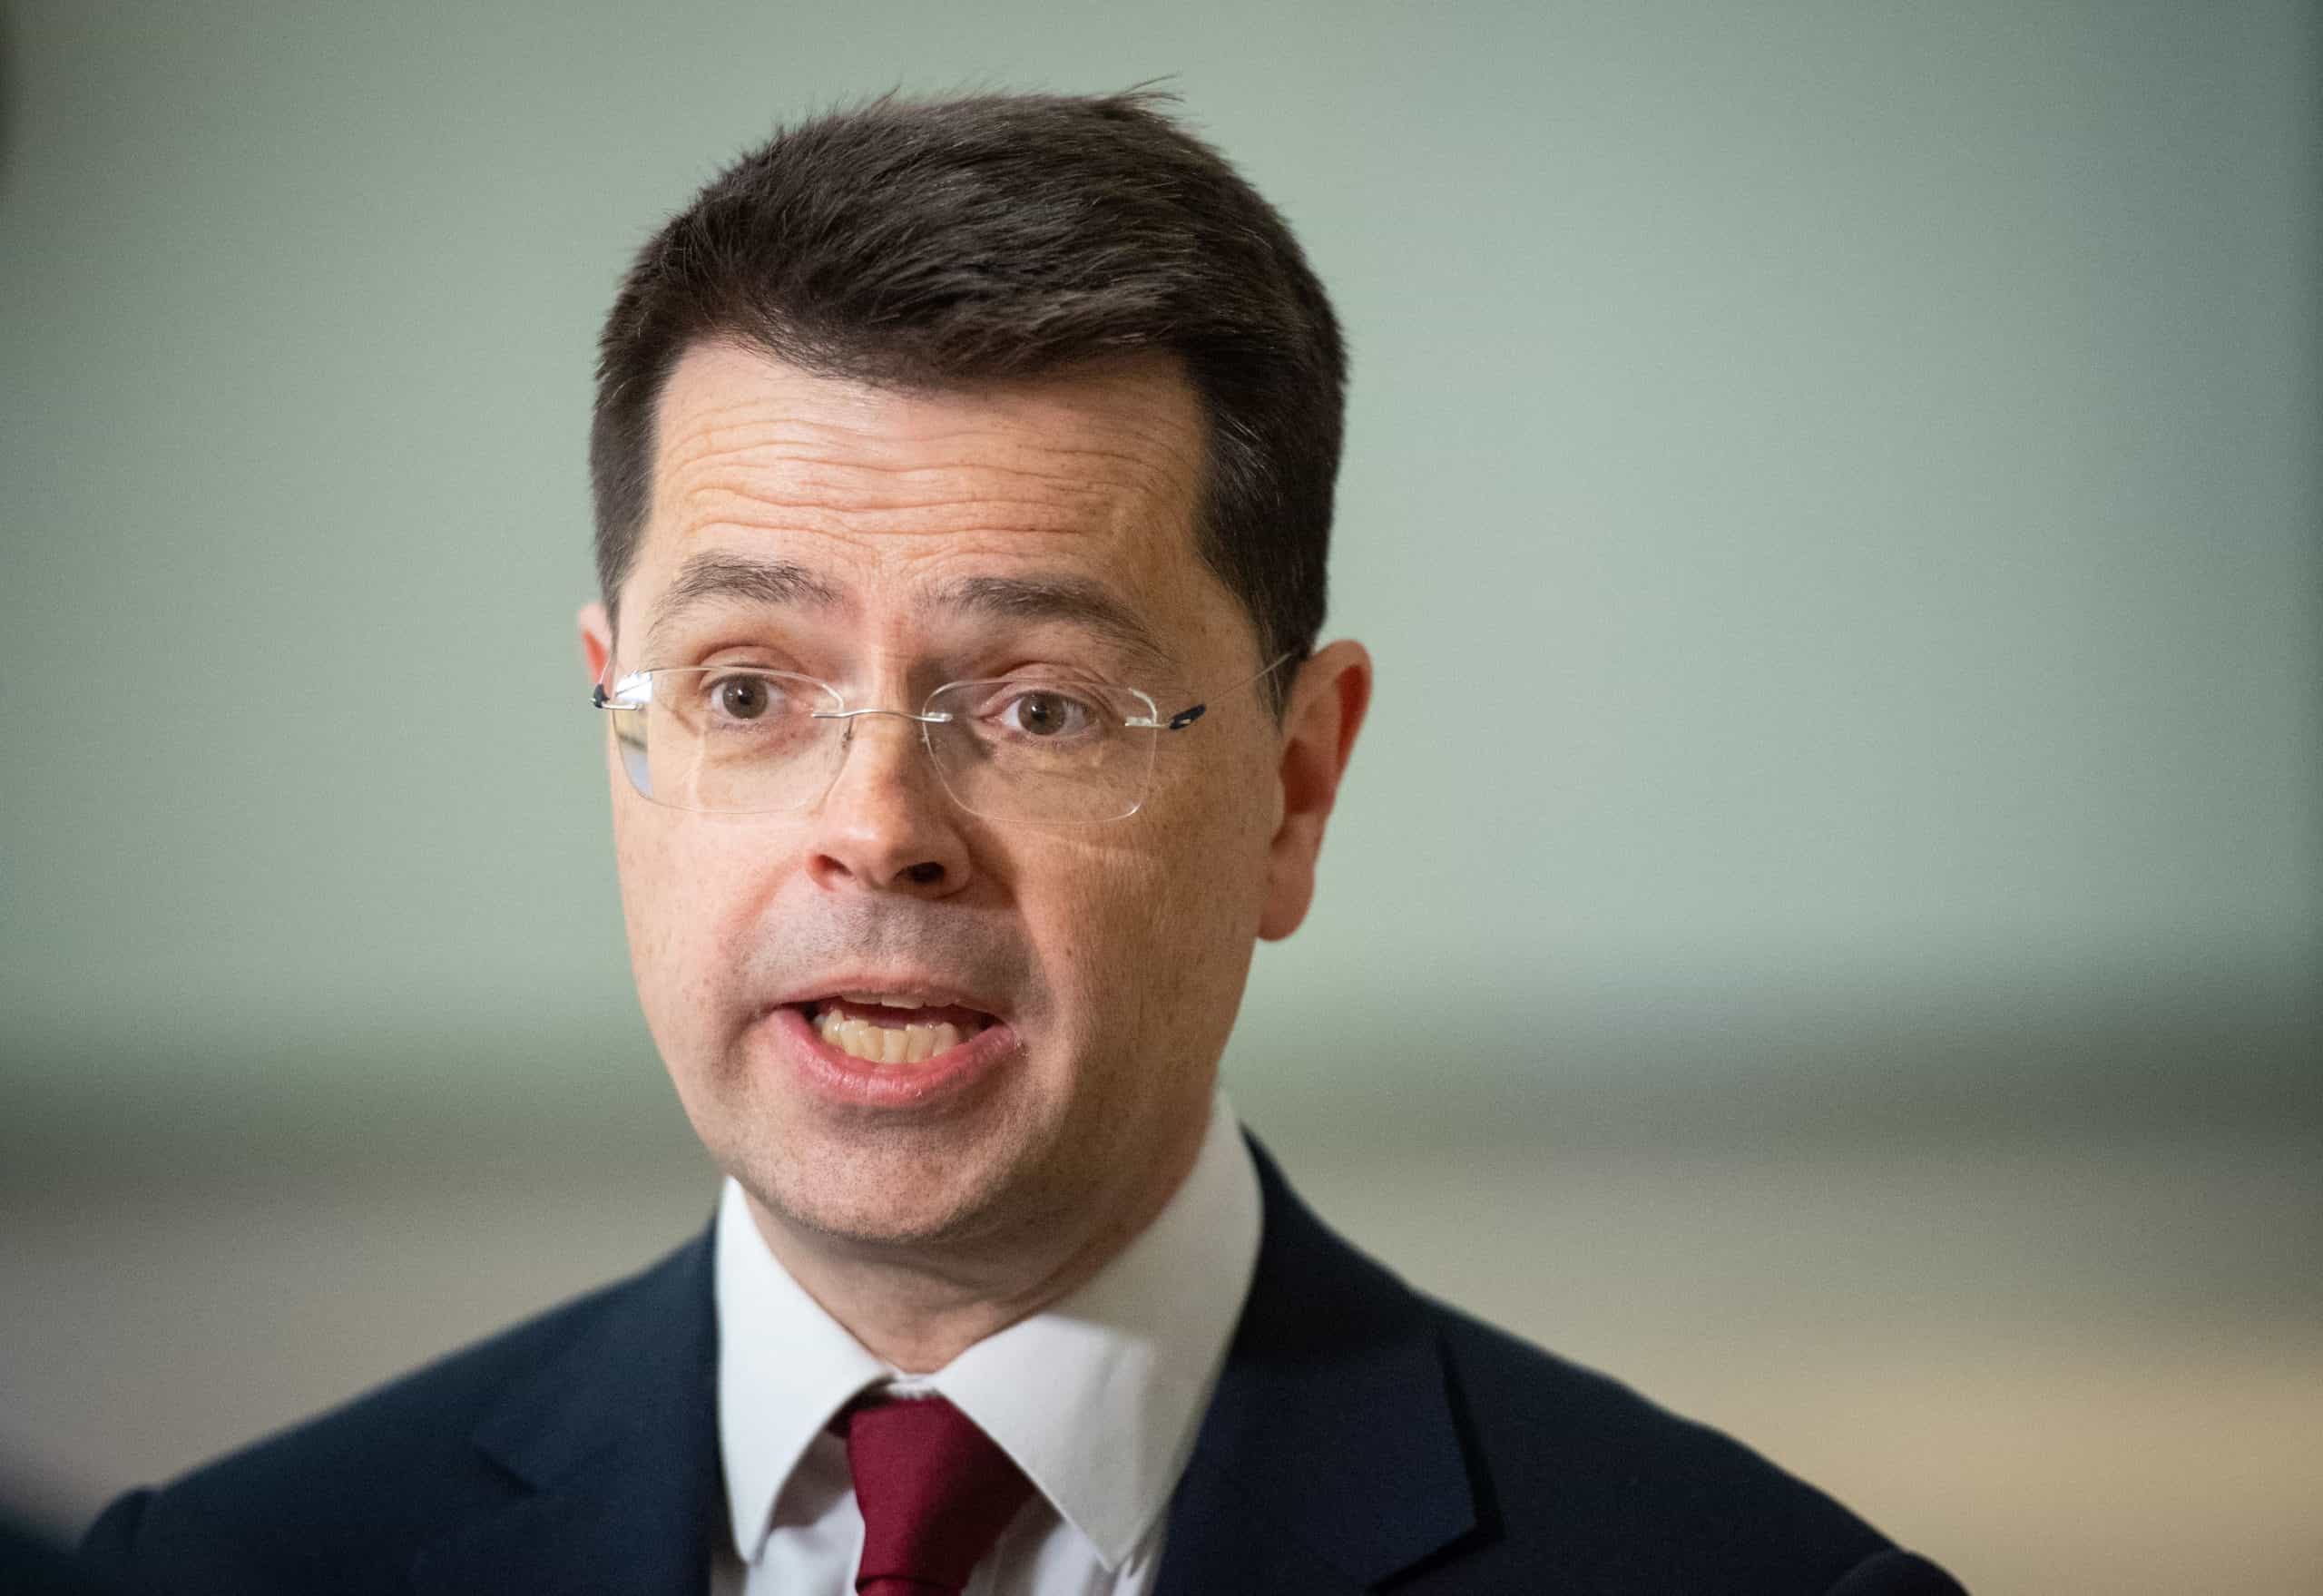 Former minister James Brokenshire dies with family at bedside